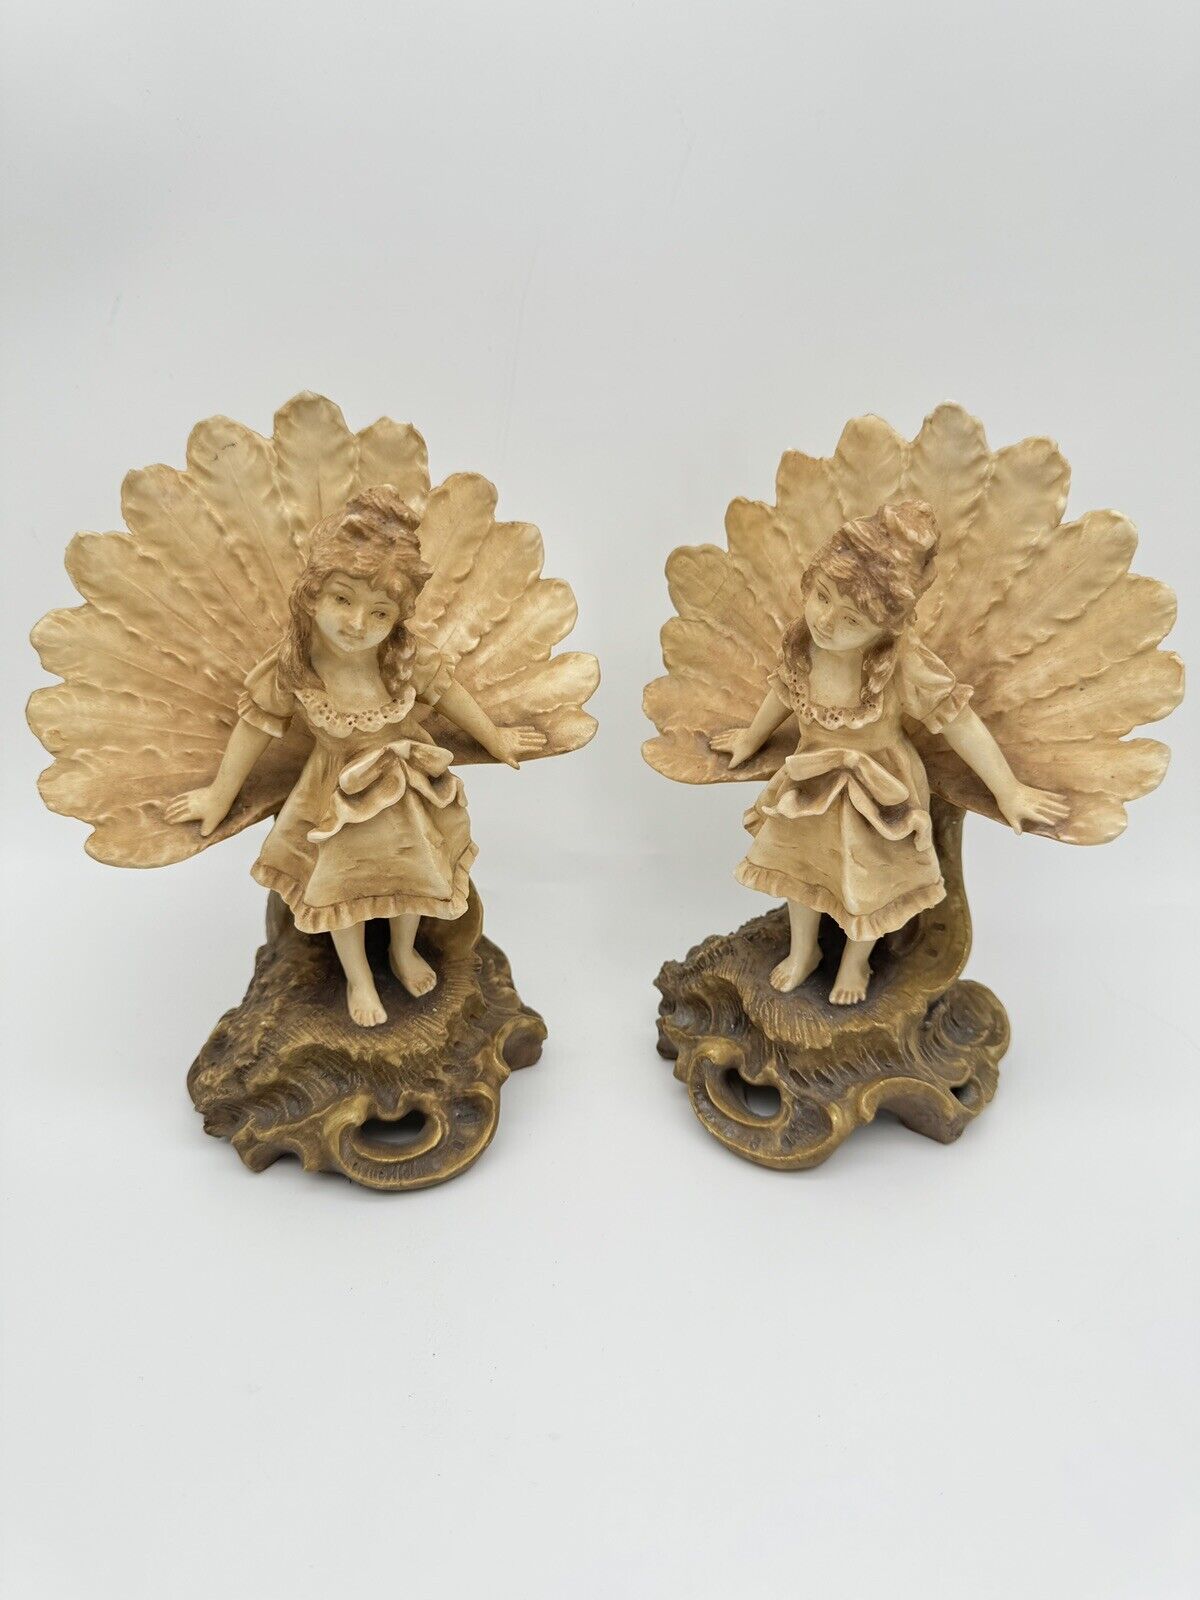 Pair Of Victorian Style Mantle Figurines Depicting Young Girl AS IS